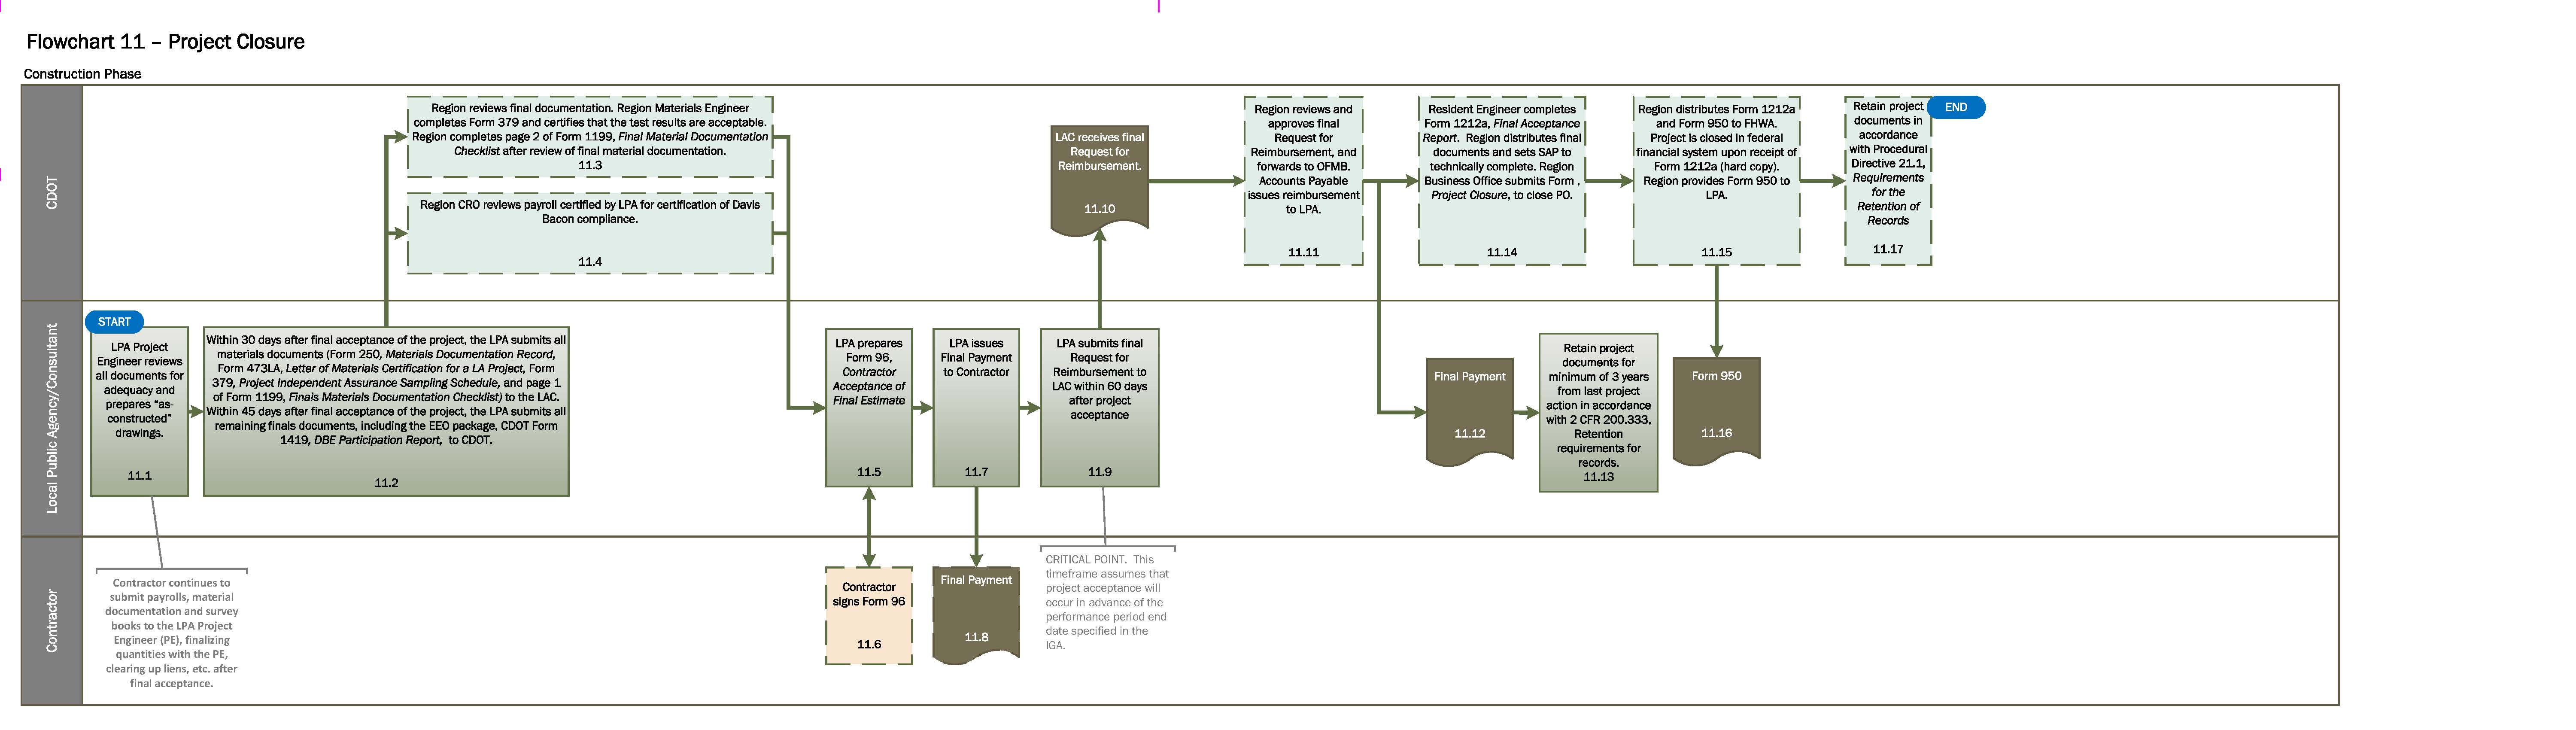 Government Contracting Process Flow Chart